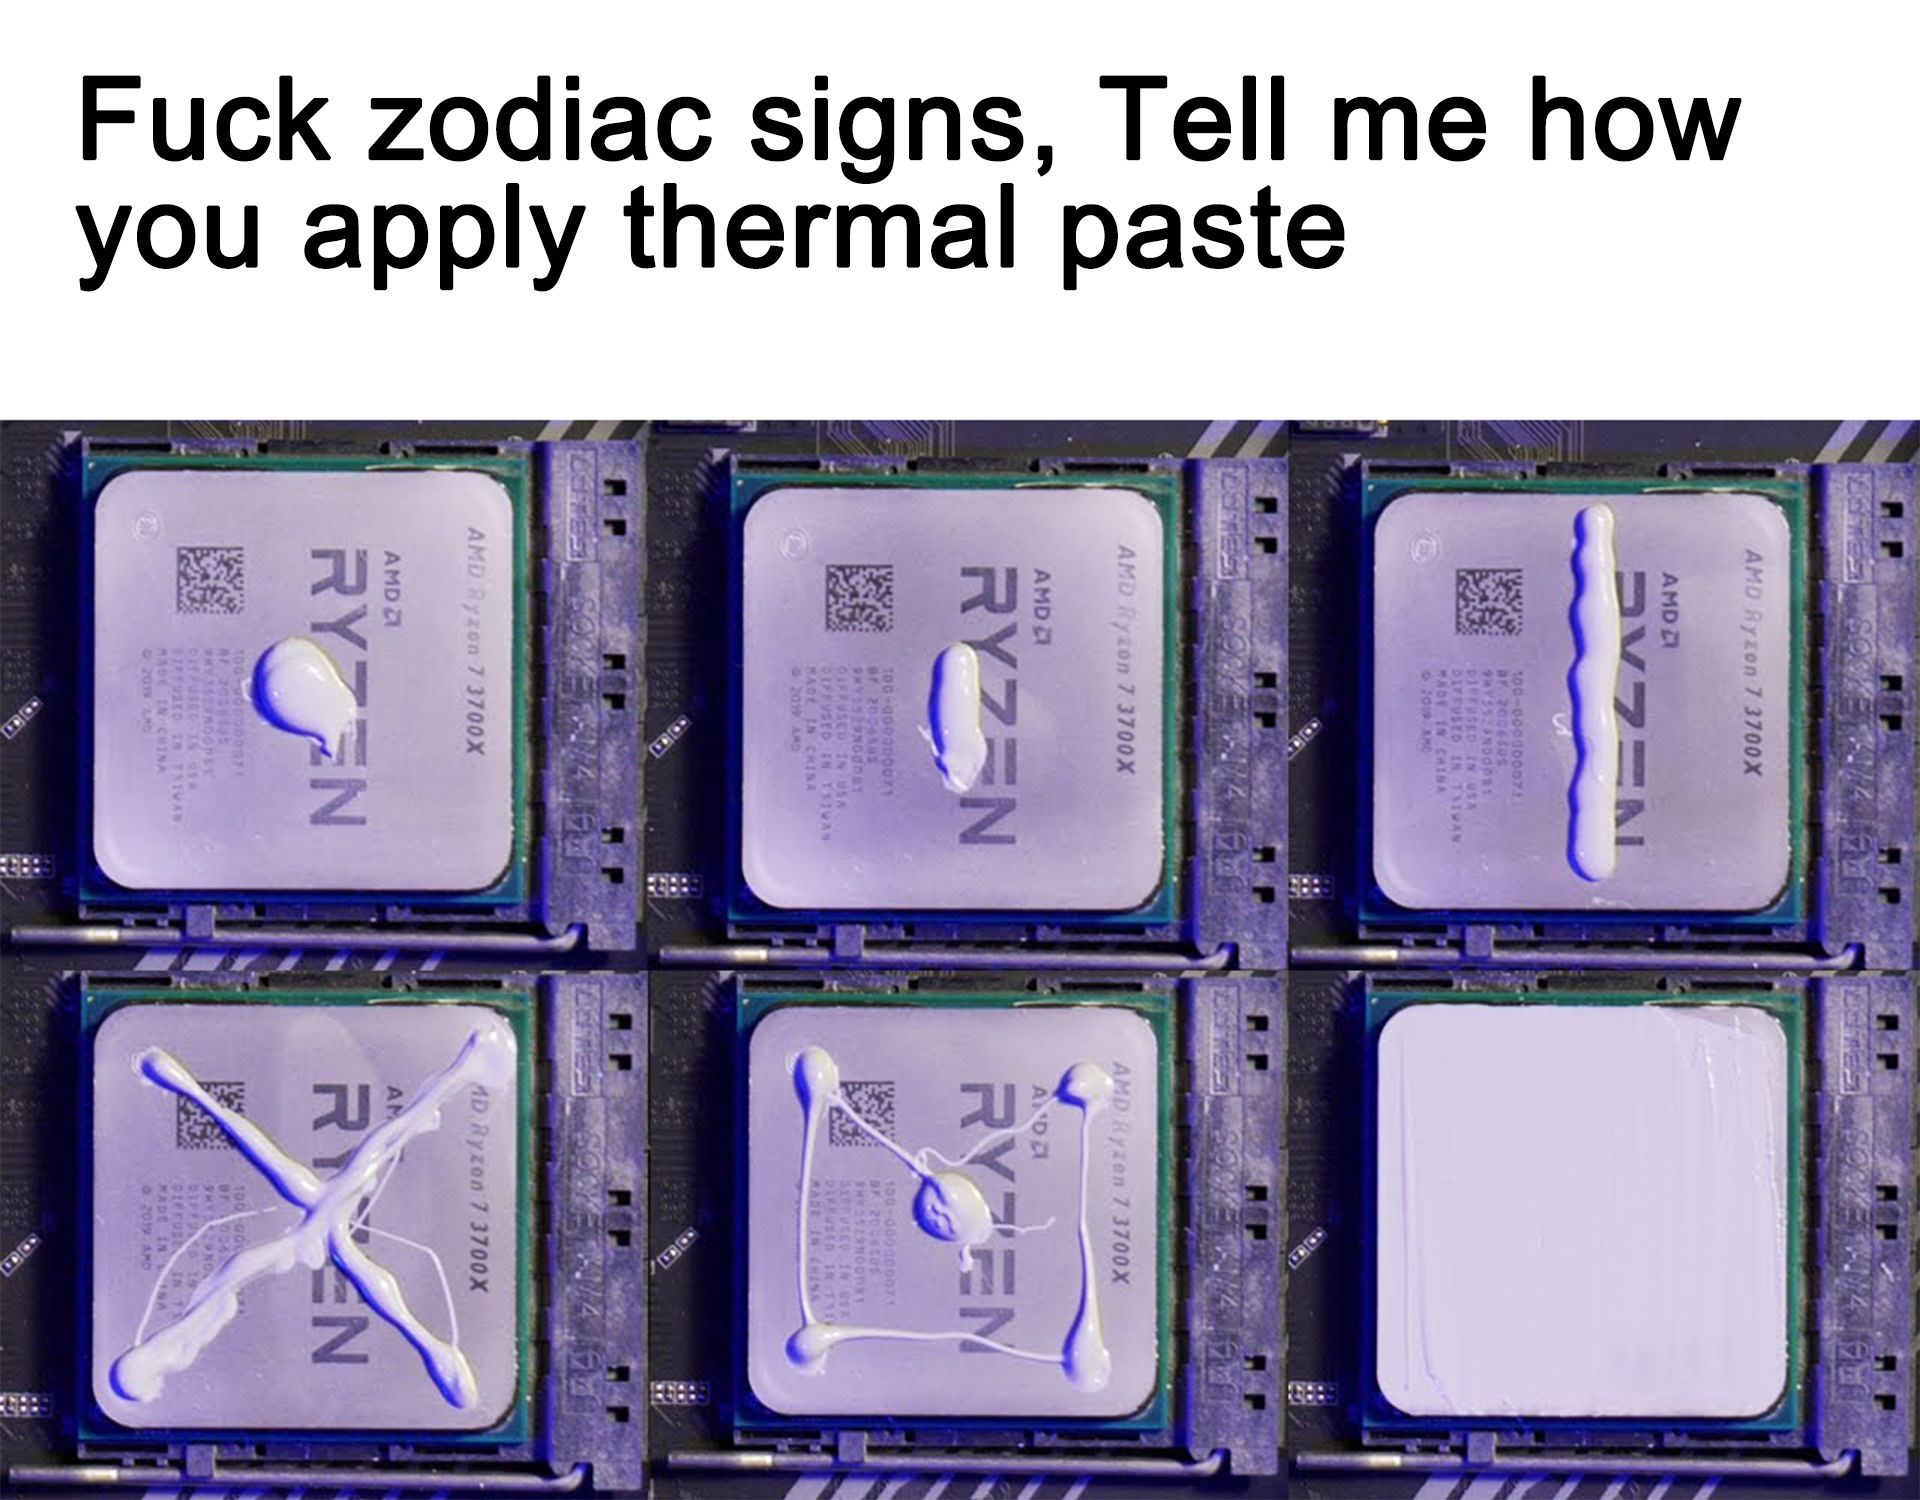 i mean your CPU temp is more important than zodiac anyways